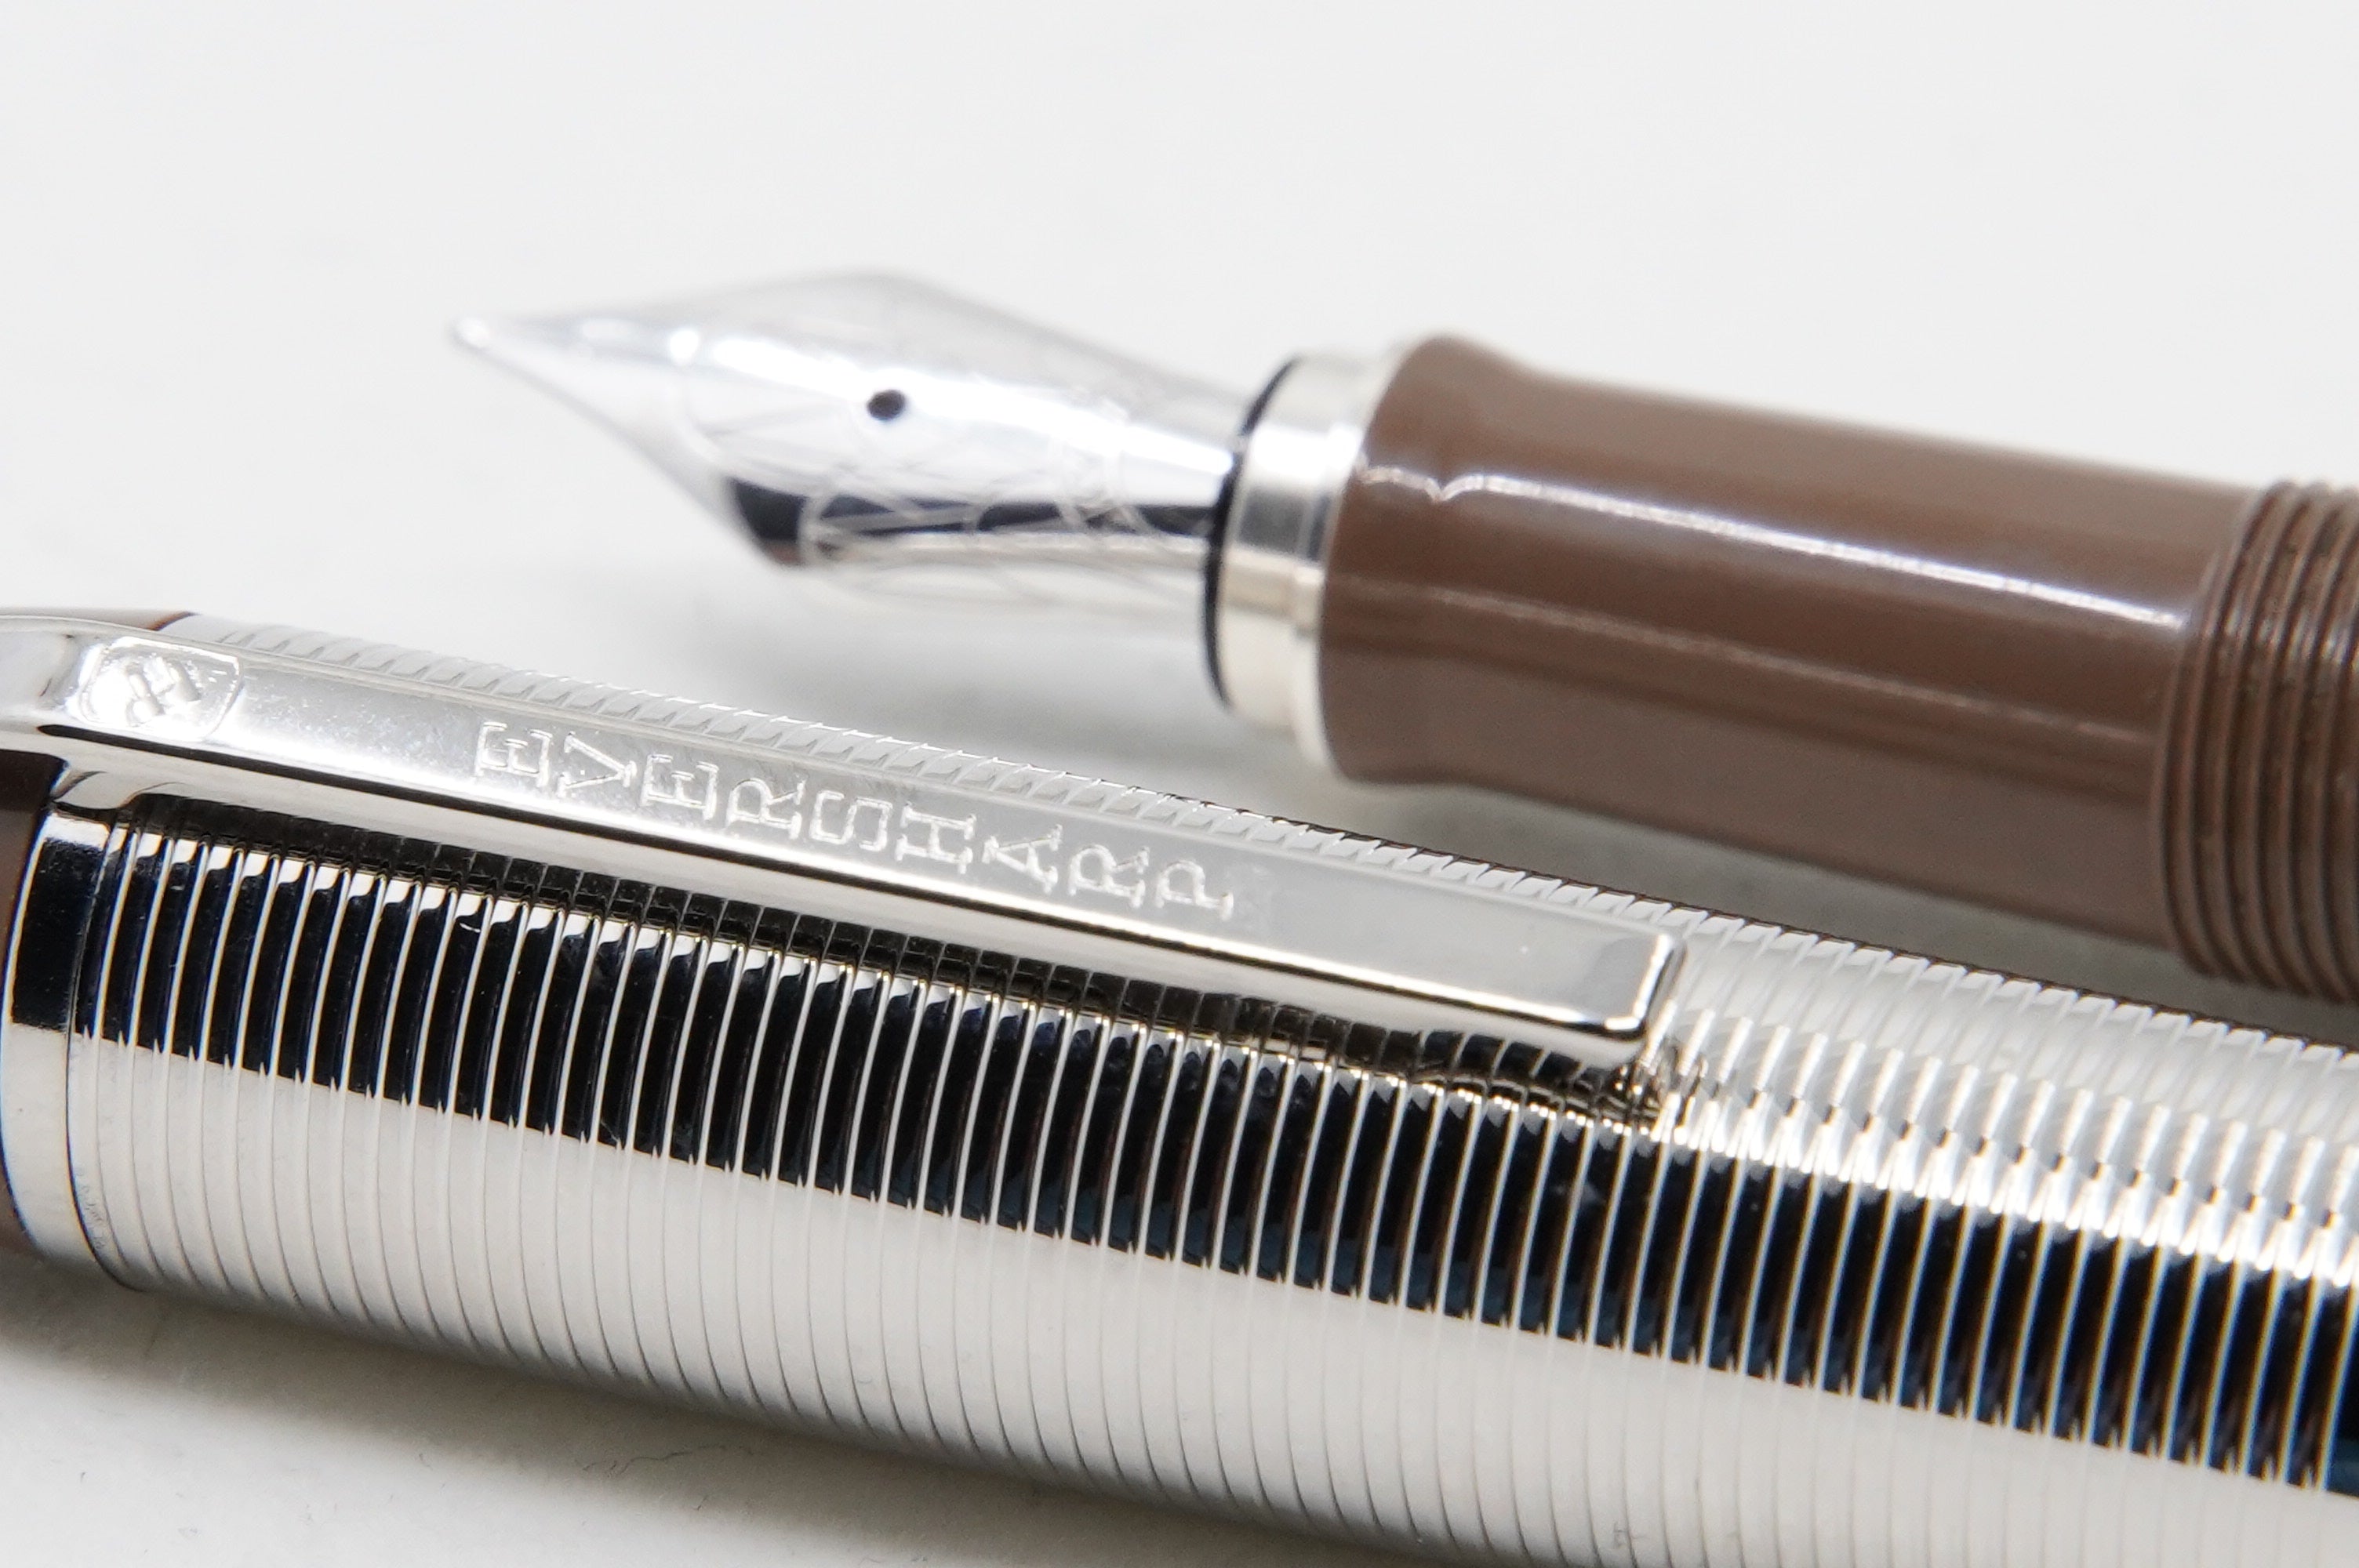 Wahl Eversharp Skyline FP Chocolate - The iconic SKYLINE created by Henry Dreyfus in 1939